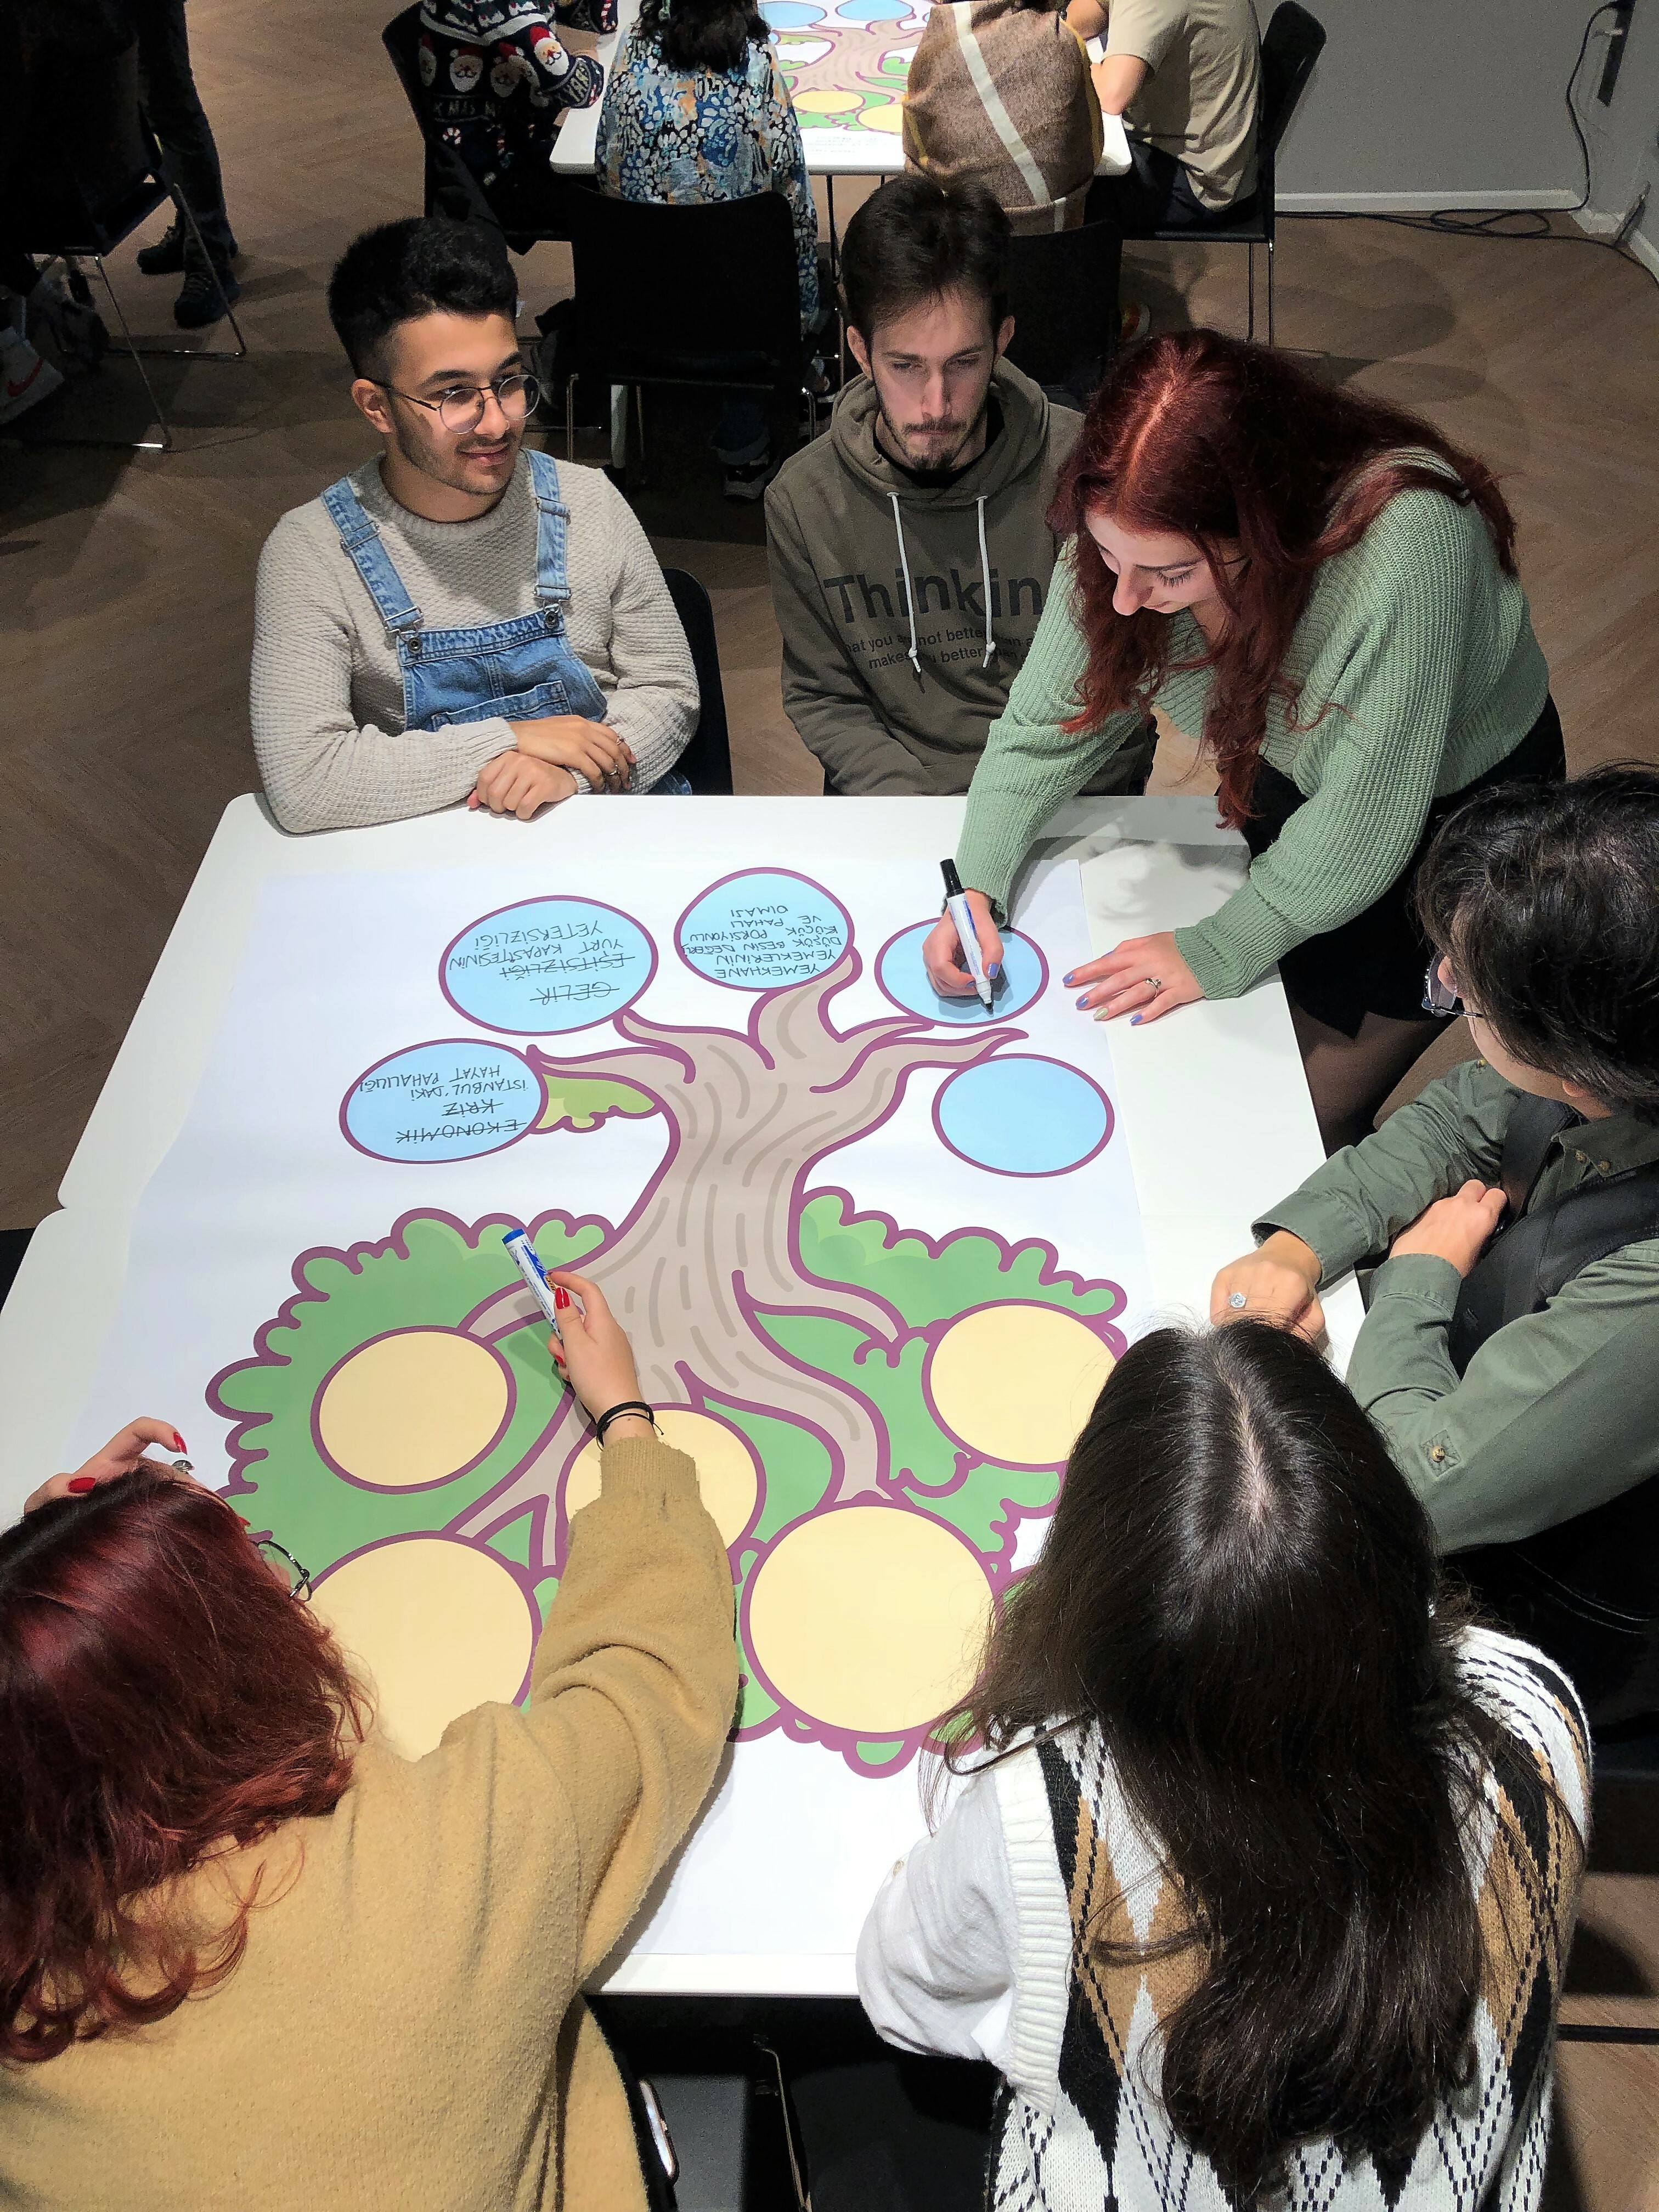 A Group Of Six Participants Discuss And Fill In A Cause And Effect Tree To Map Out A Local Problem